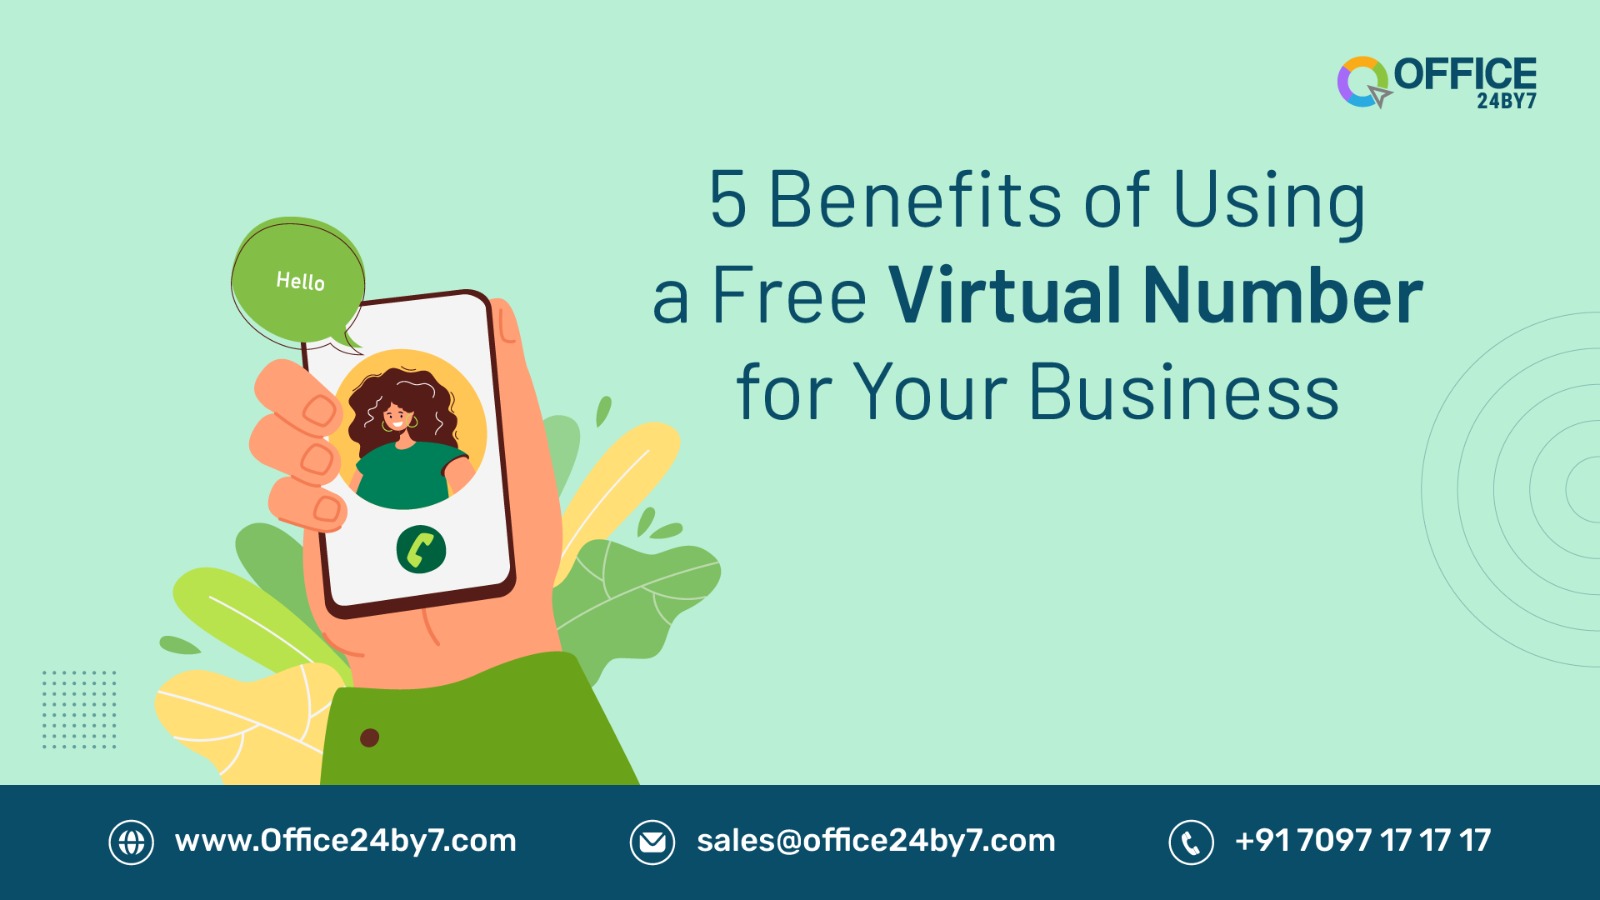 5 Benefits of Using a Free Virtual Number for Your Business